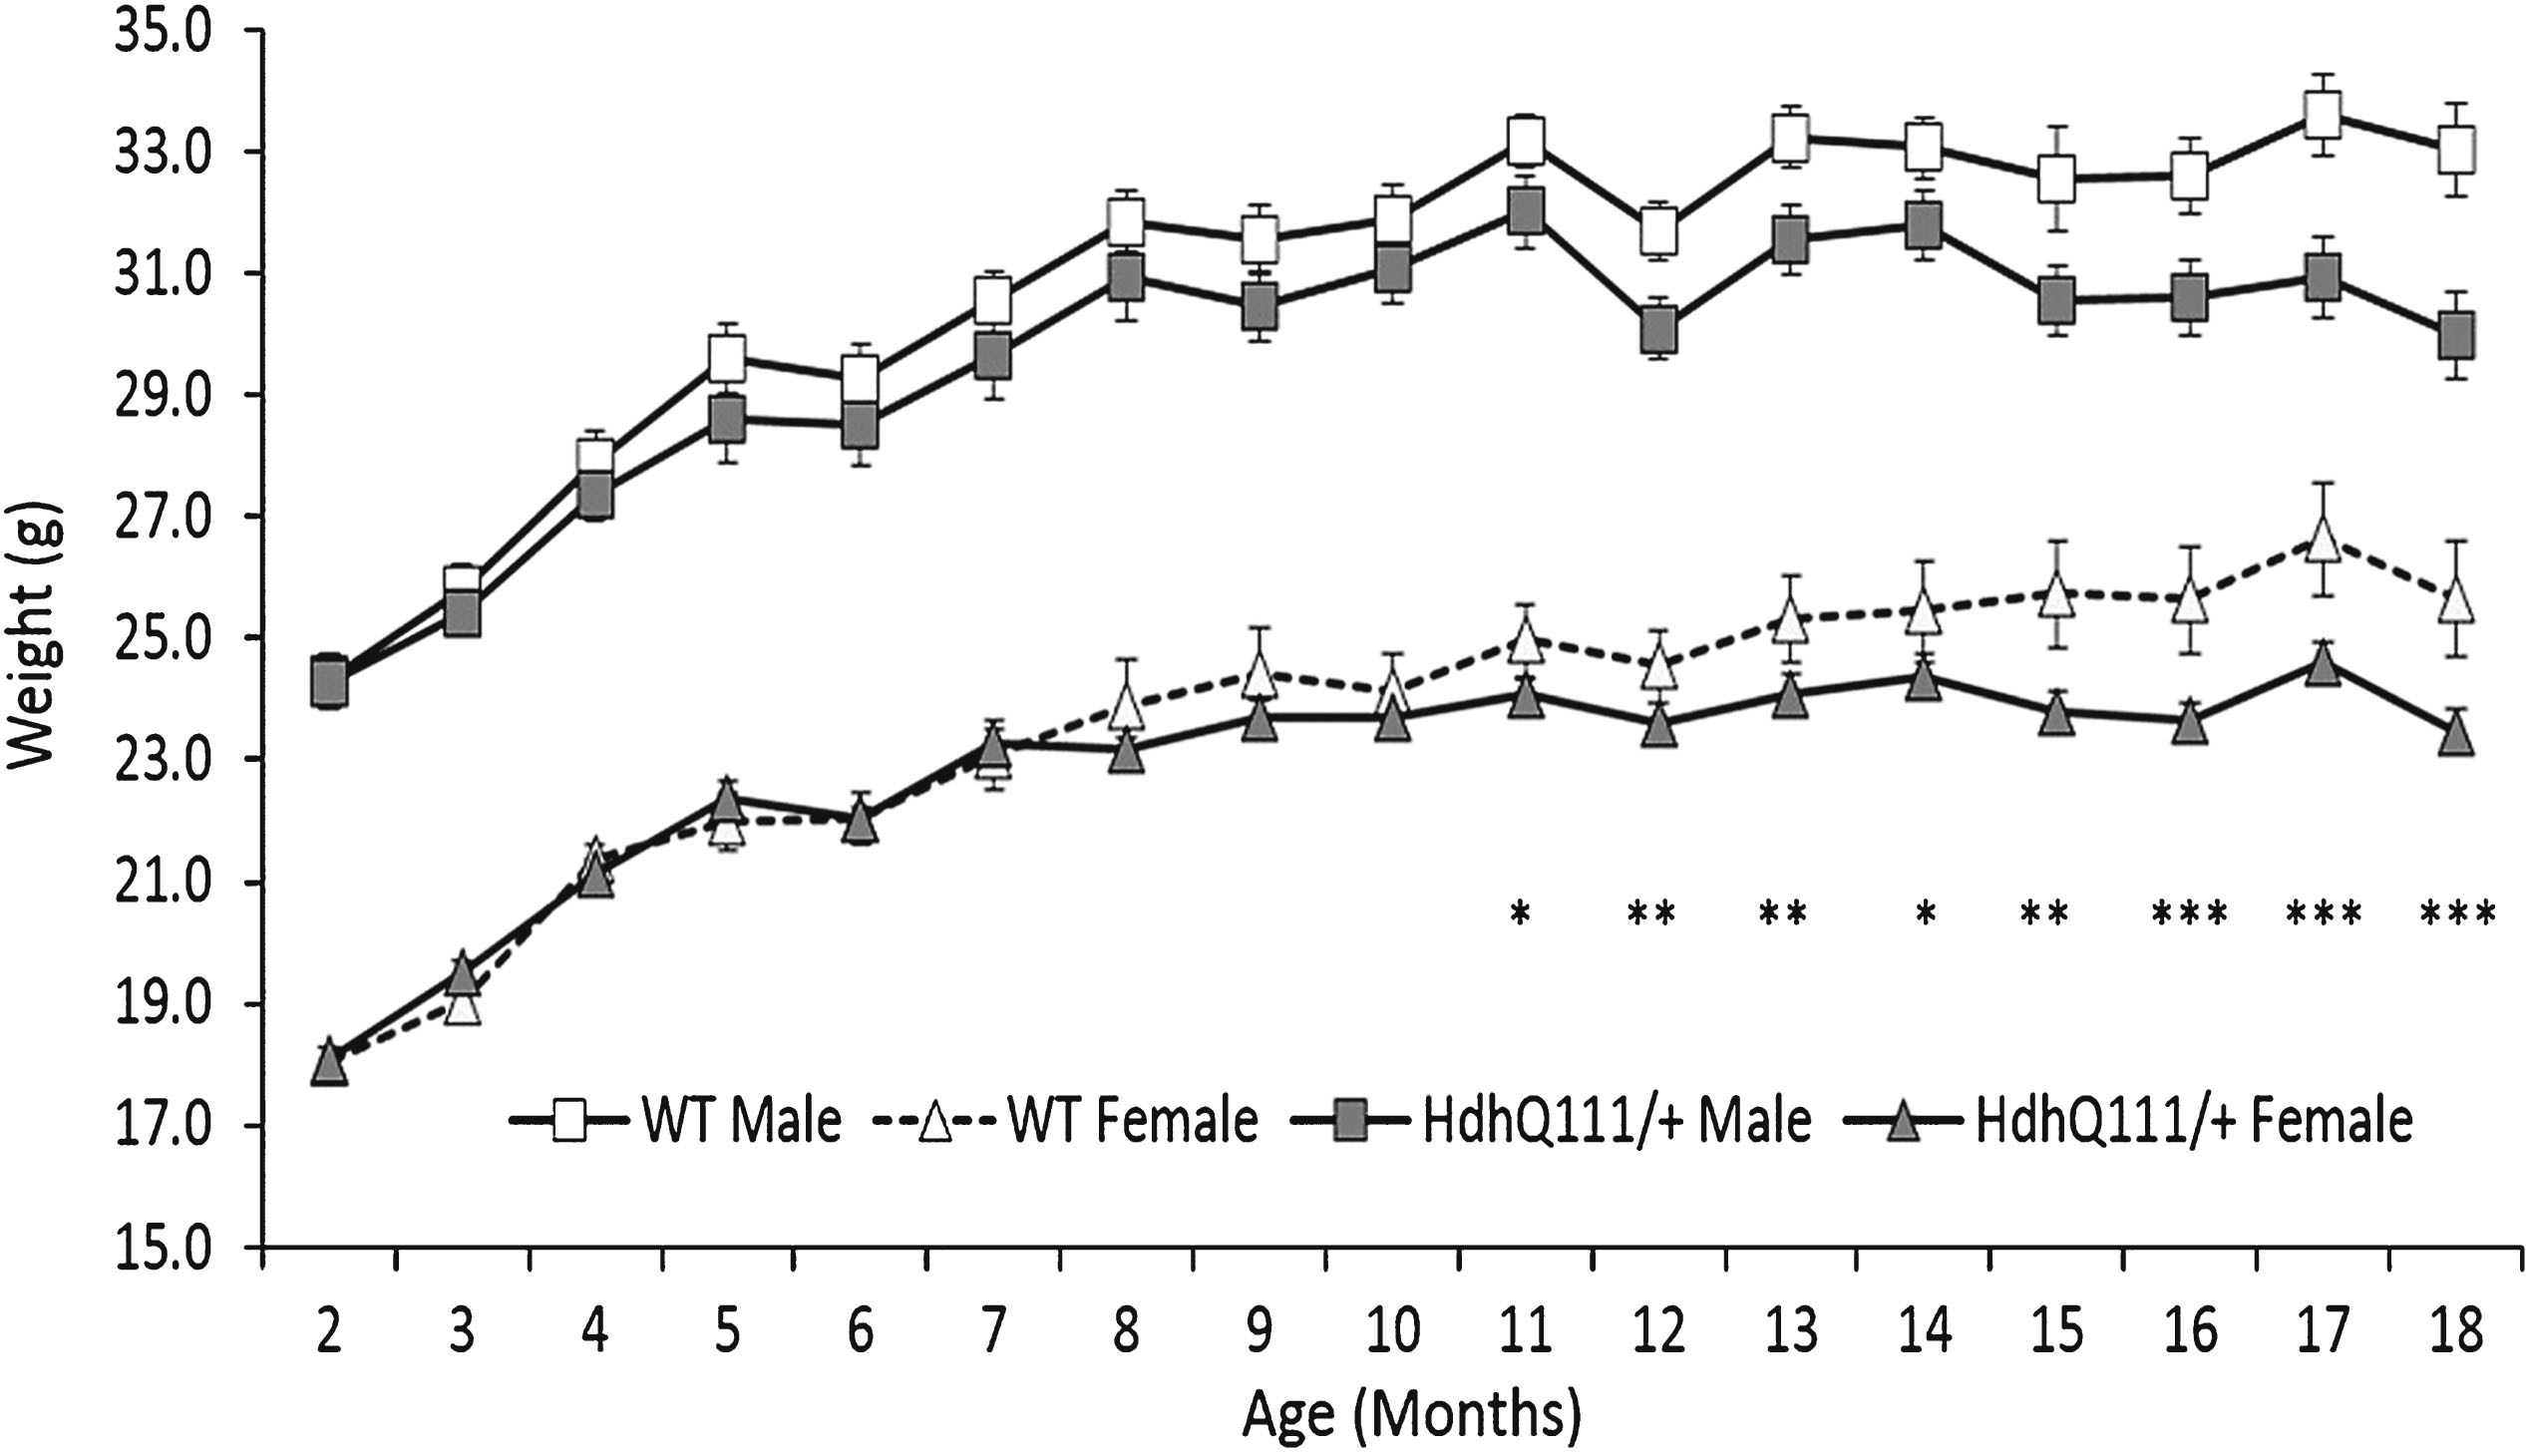 Weight progression of HdhQ111/+ animals over 18 months. Mice were weighed at 2 months of age and subsequently every month. The data represents the mean weight of HdhQ111/+ and wild type animals averaged to provide the data point. Data was analysed using a repeated measures ANOVA. The data represents a total of 36 HdhQ111/+ animals, of which 16 were male and 20 wild type animals, of which 10 were male. Error bars represent standard error of the mean. Significant differences are stated for males and females combined. Asterisks represent the significance level for a genotype comparison at a particular age after multiple testing correction *p < 0.05, **p < 0.01, ***p < 0.001.